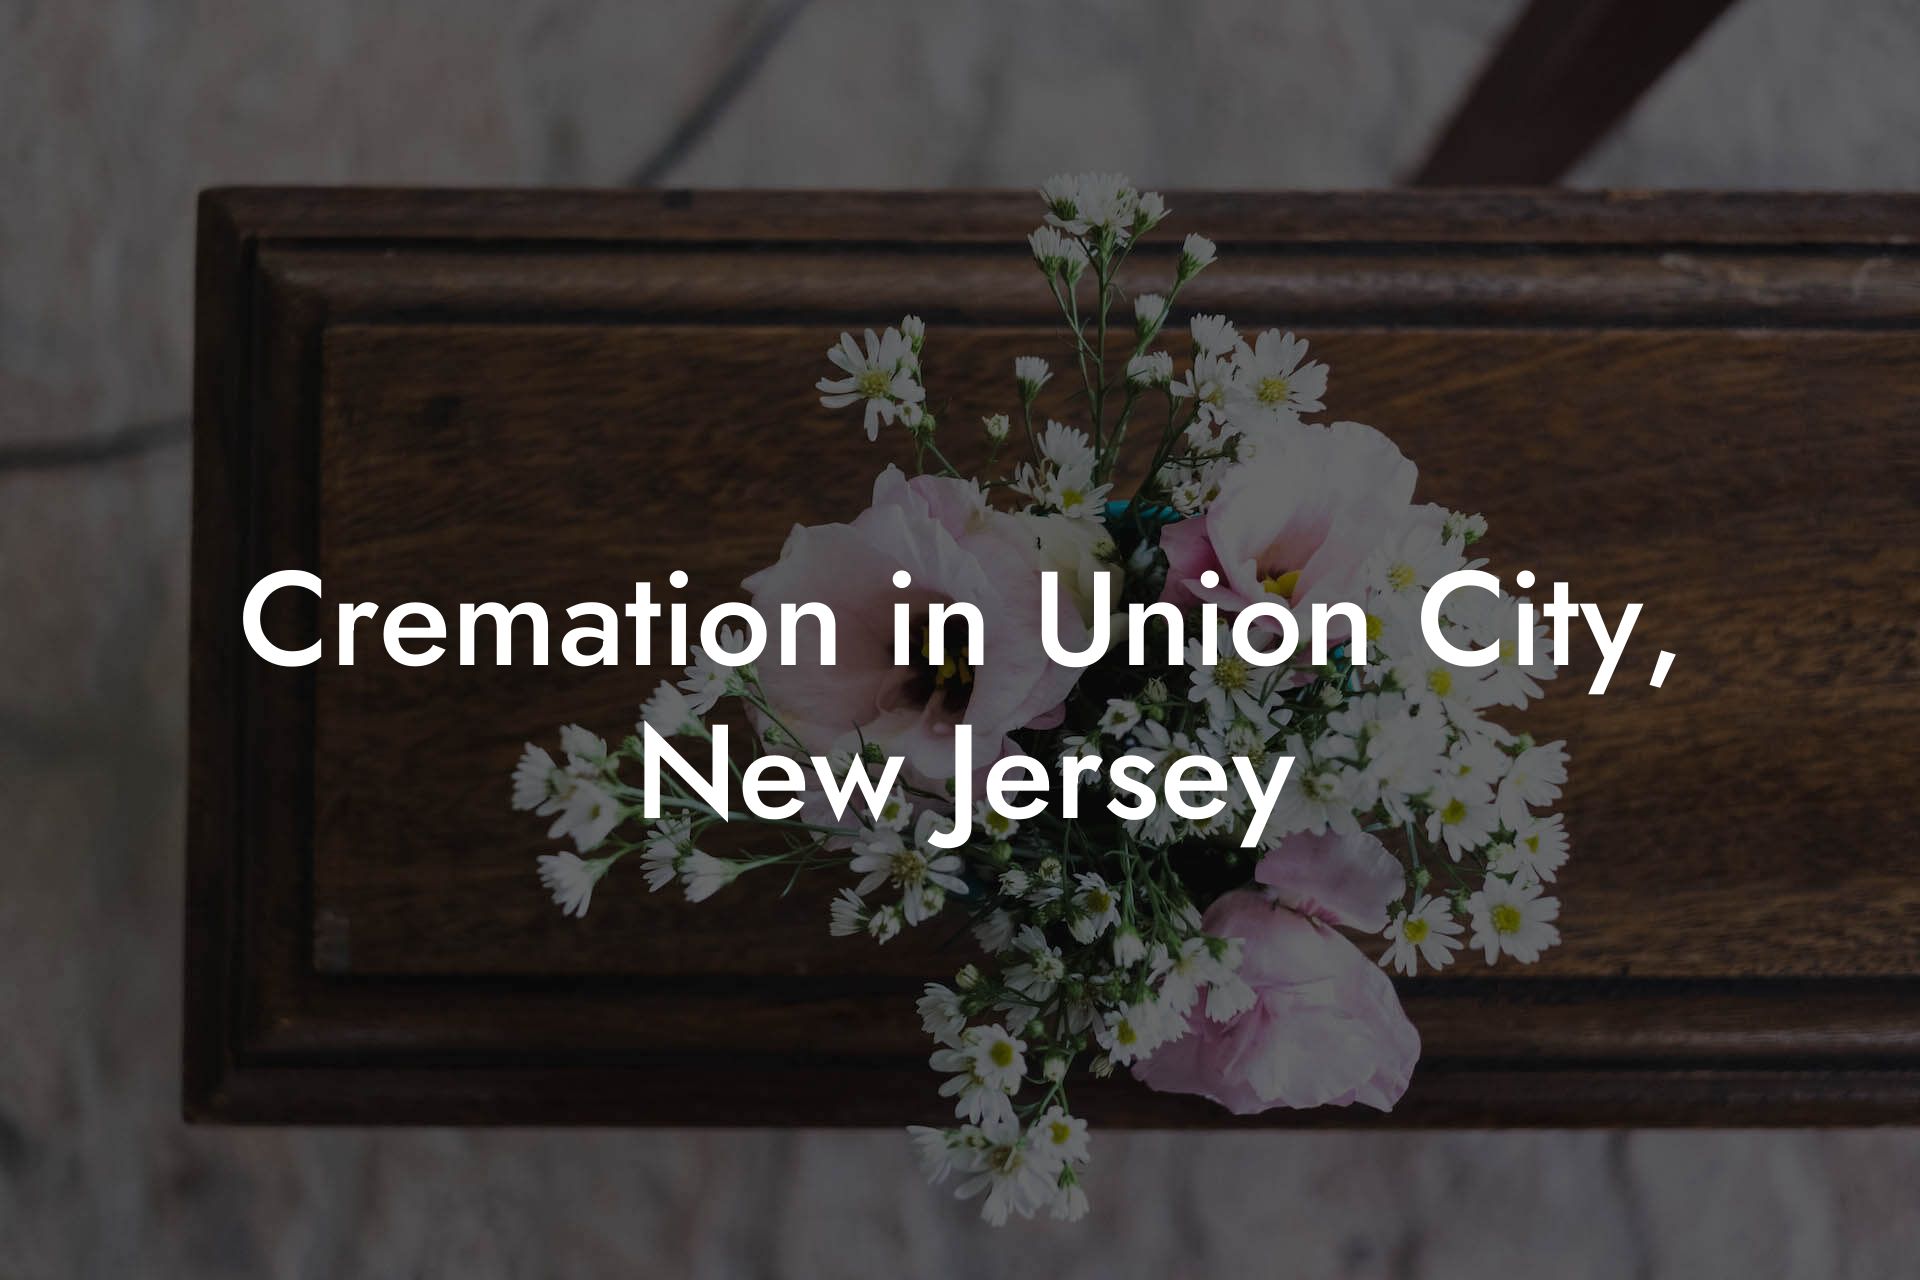 Cremation in Union City, New Jersey